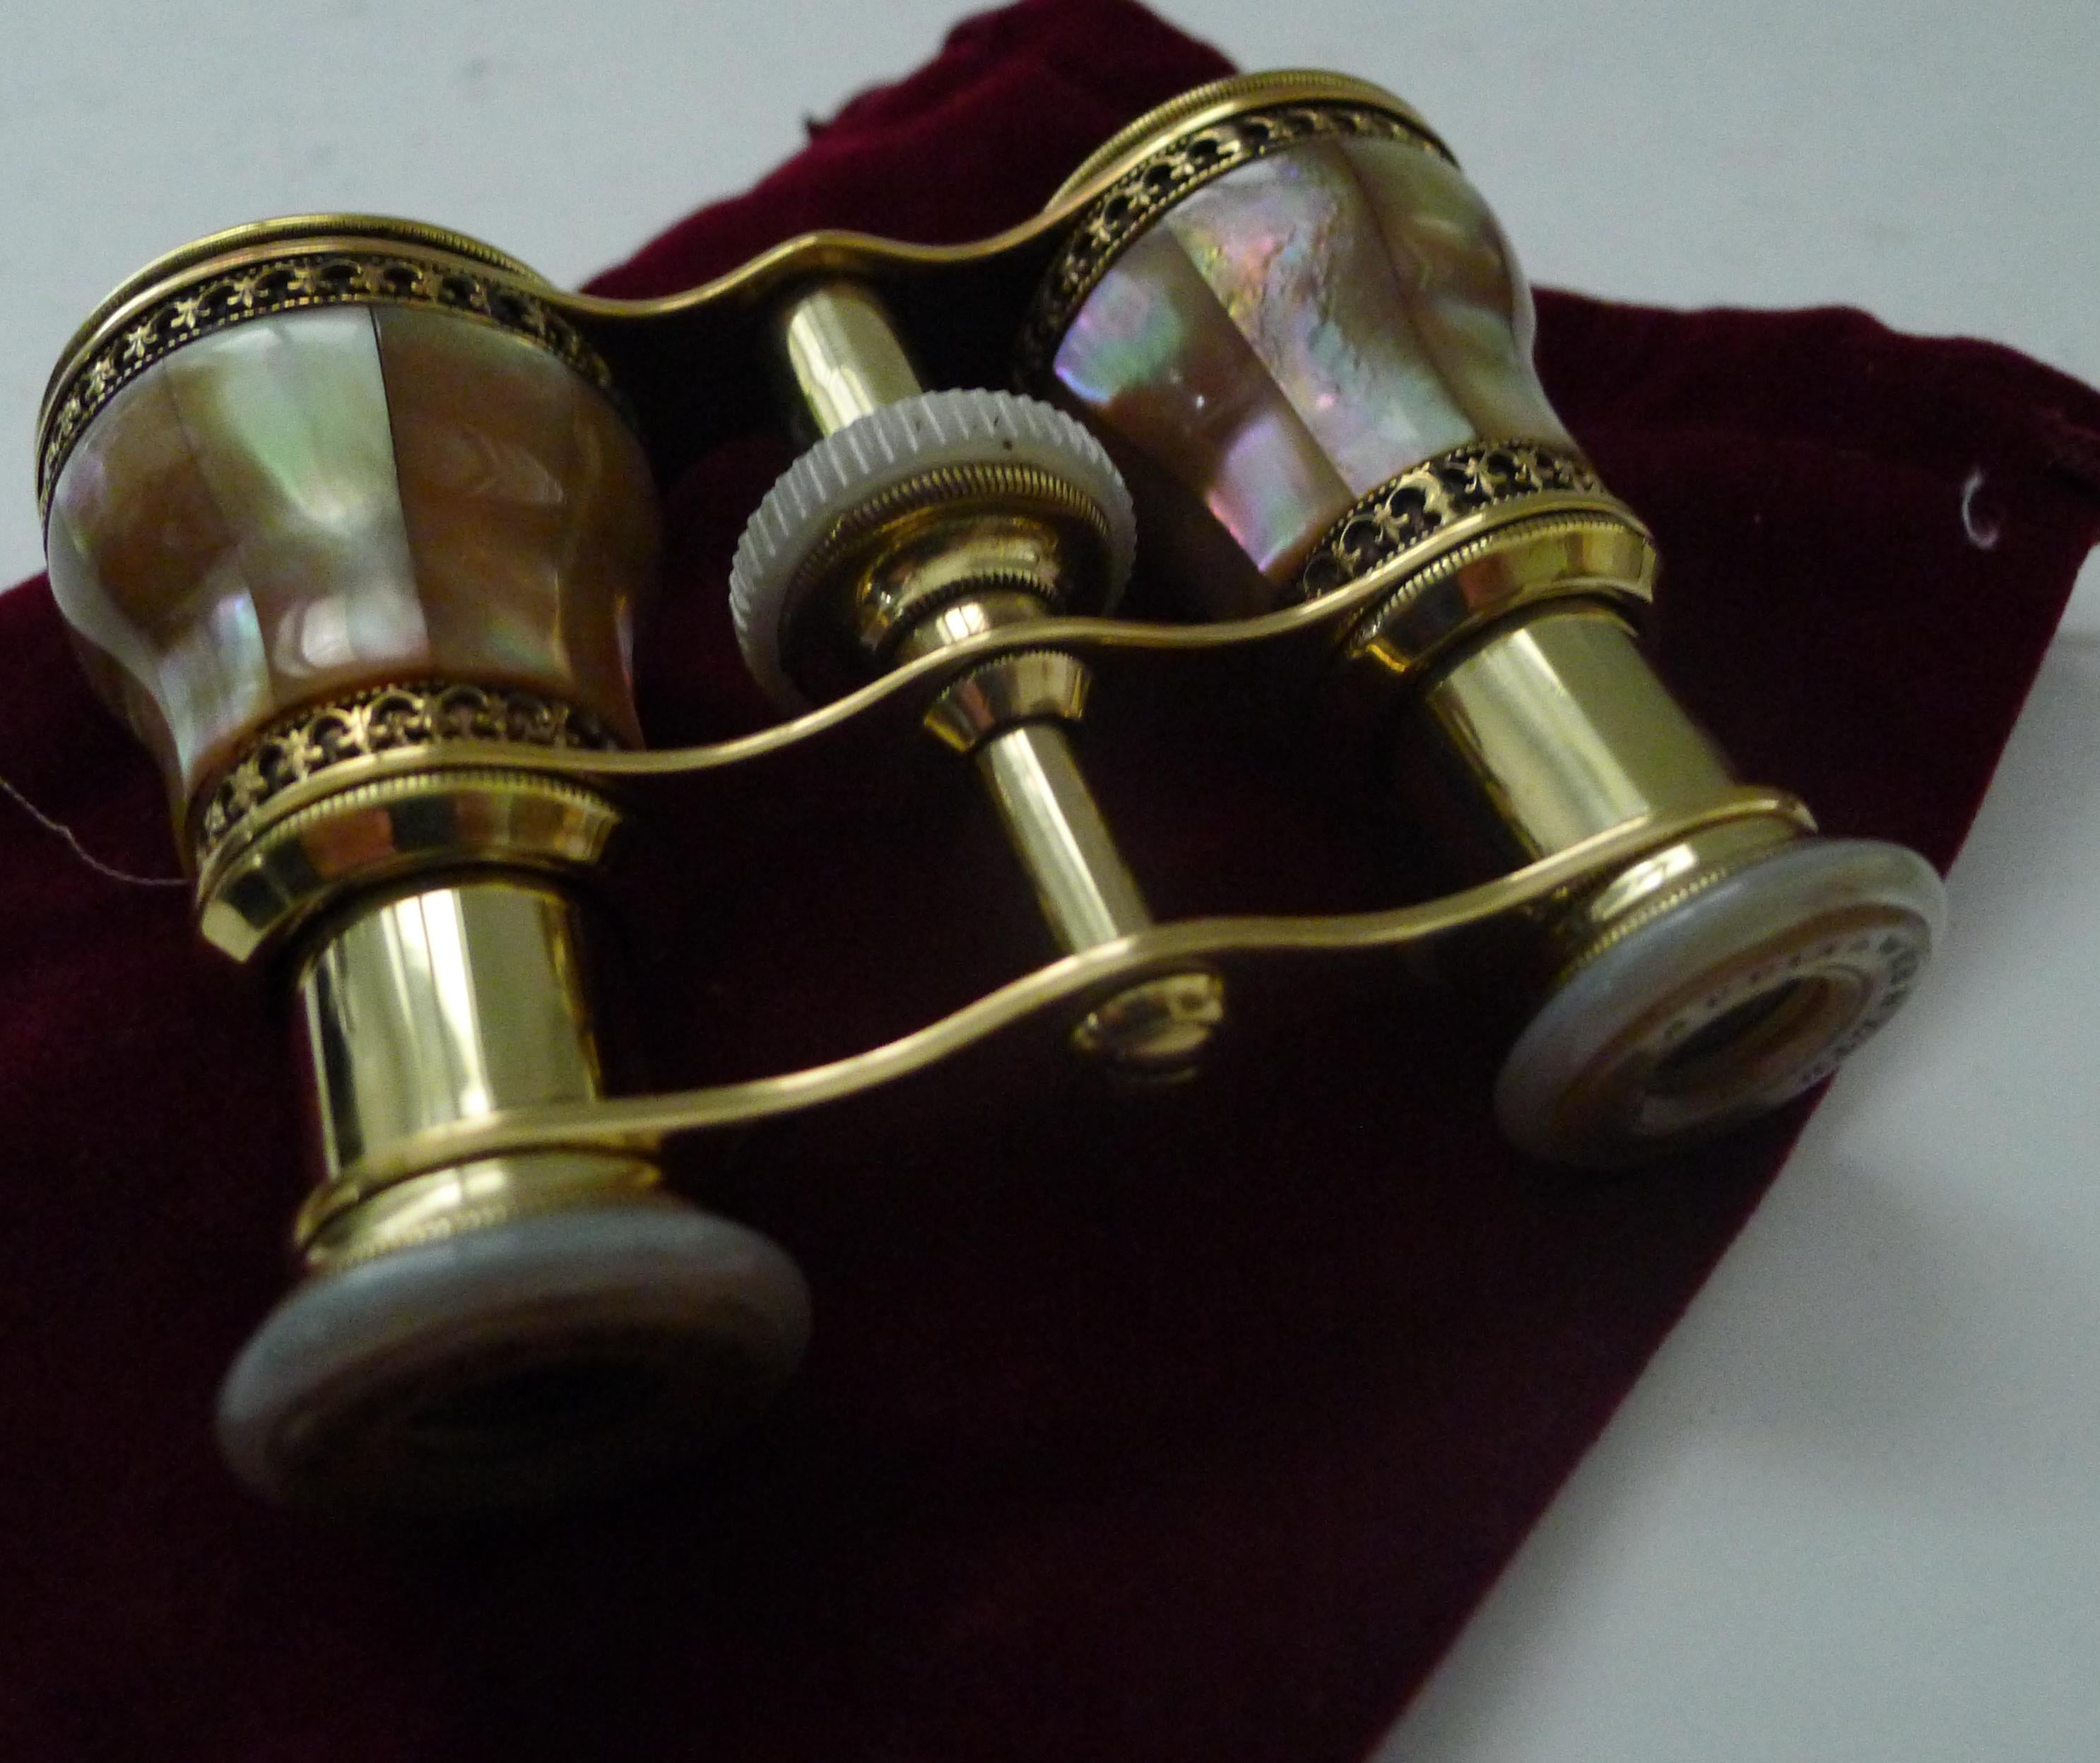 A very fine pair of Opera glasses, made from polished brass having been meticulously professionally polished, restoring them to their former glory. Covered in Mother of Pearl or Nacre shell with it's magical iridescent qualities, this pair is lucky